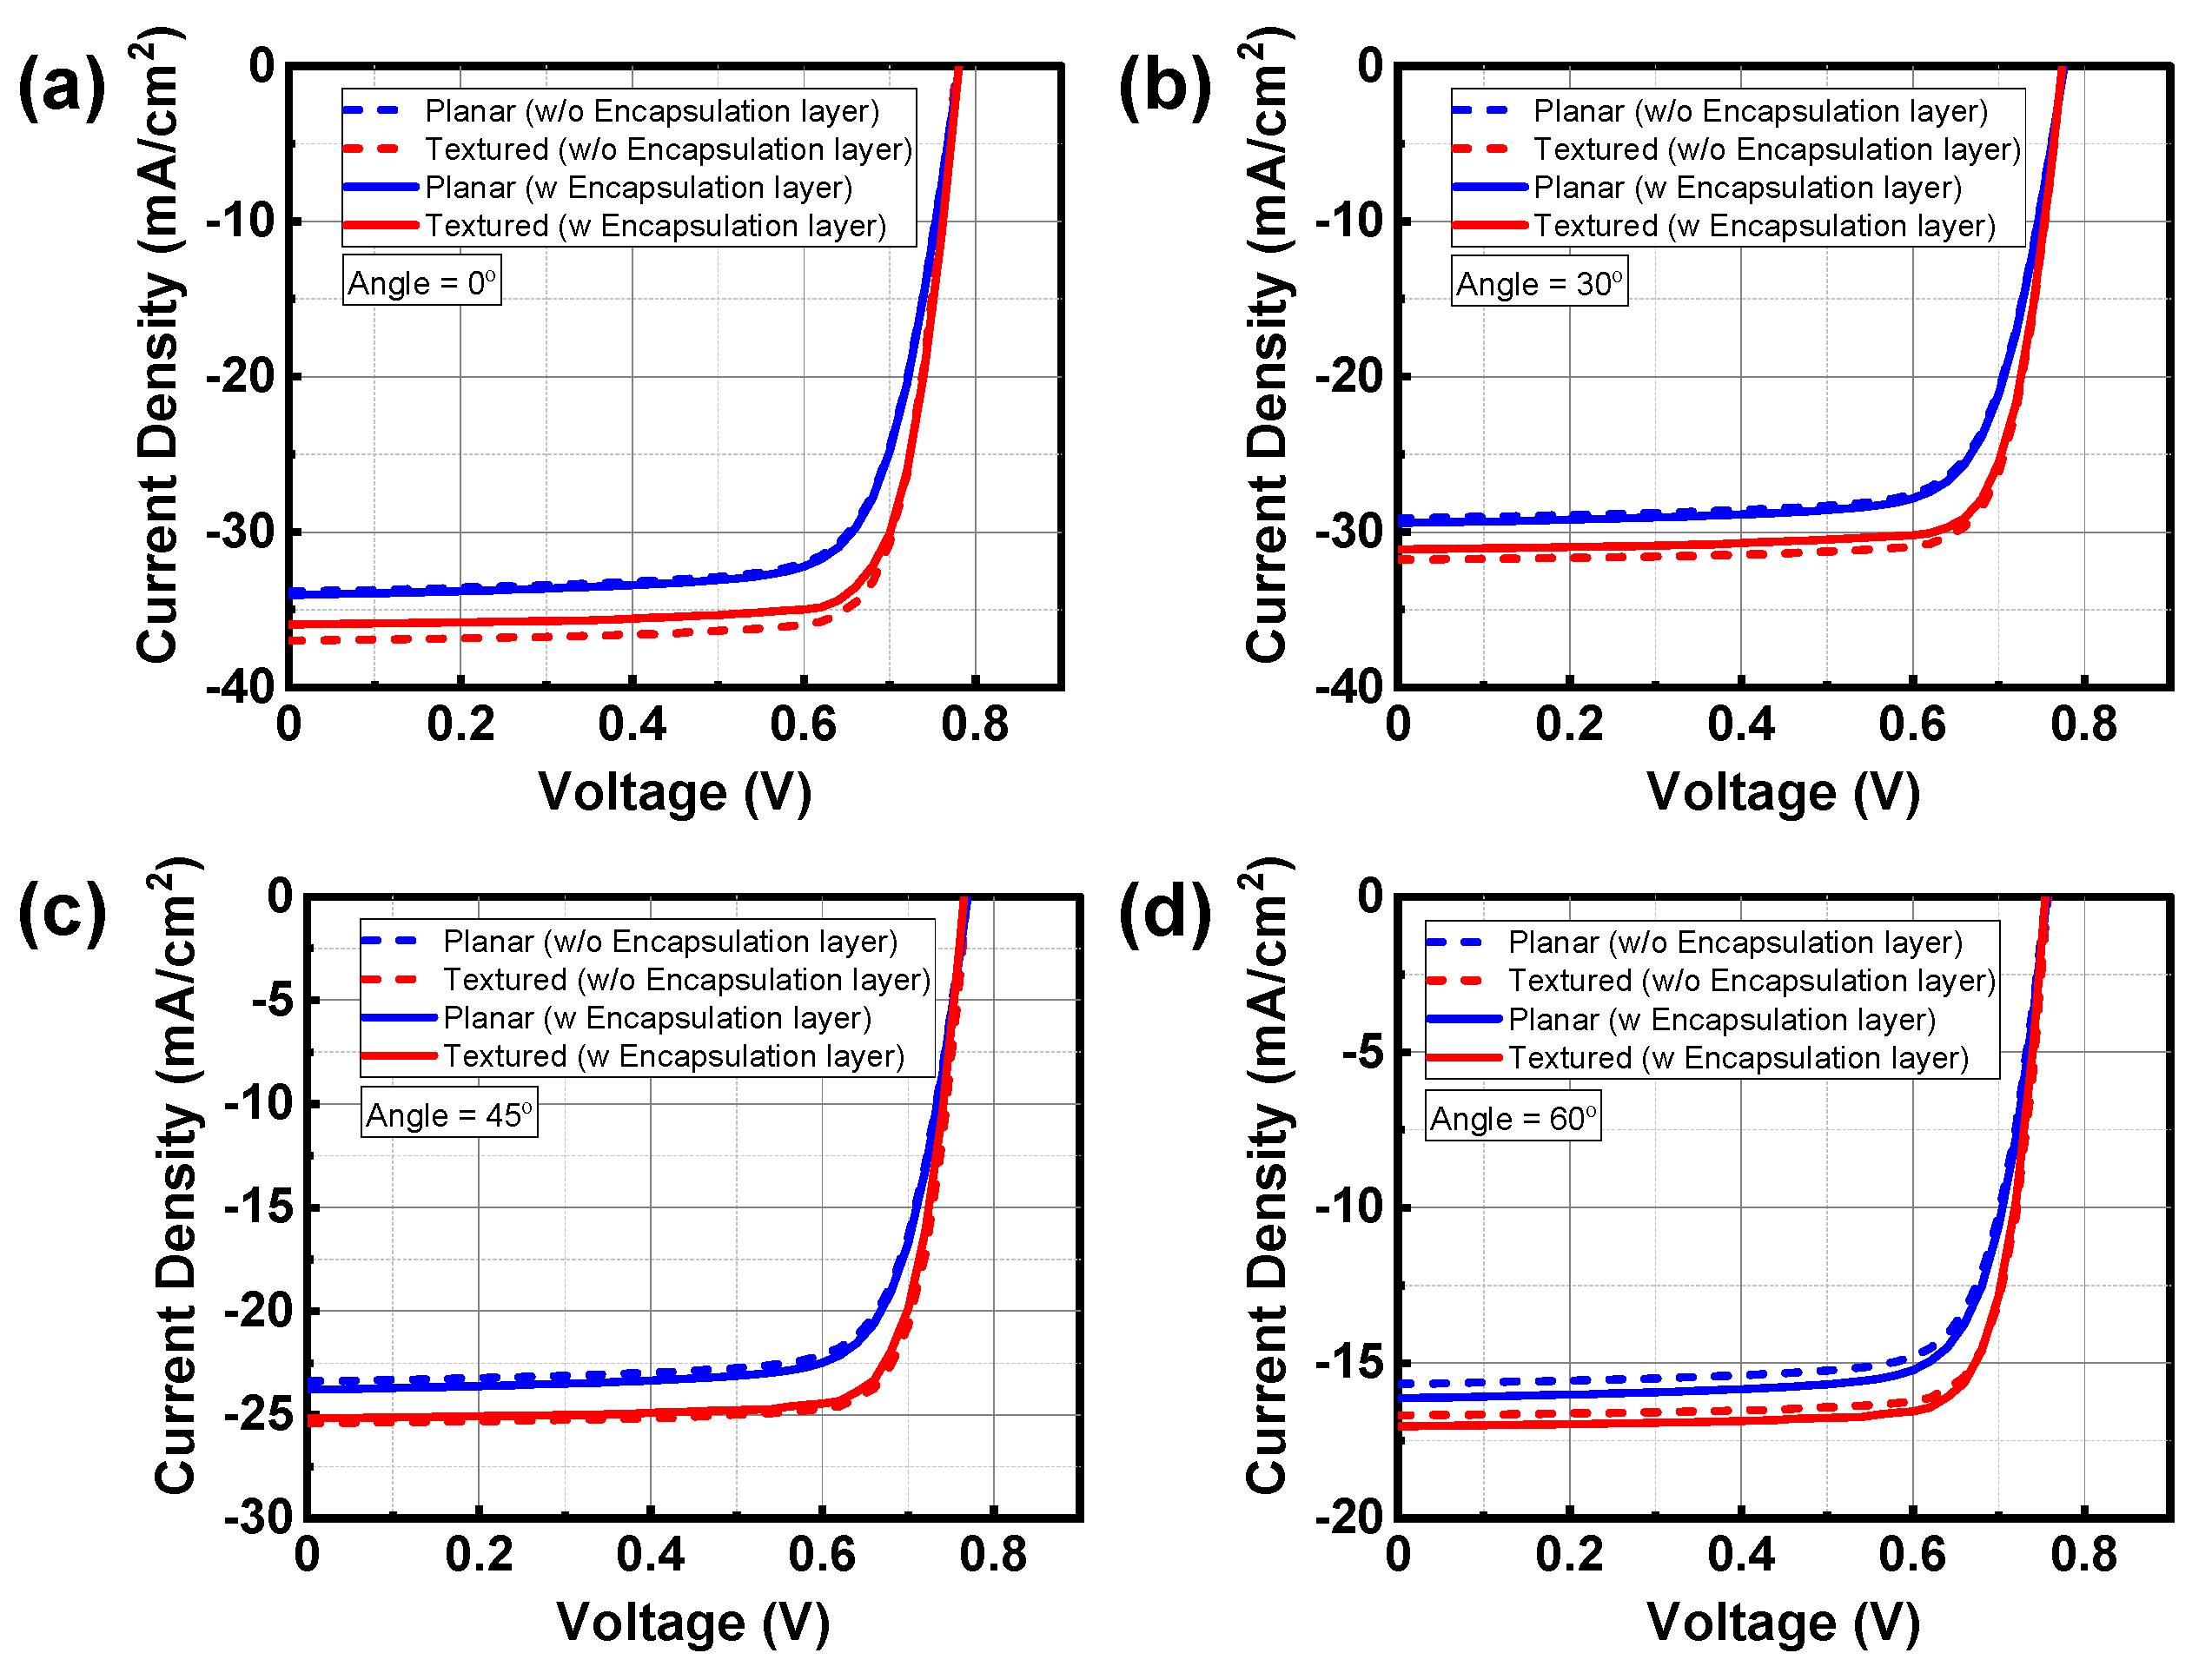 Applied Sciences Free Full Text Effect Of The Incoherent Encapsulation Layer And Oblique Sunlight Incidence On The Optical And Current Voltage Characteristics Of Surface Textured Cu In Ga Se2 Solar Cells Based On The Angle Dependent Equispaced